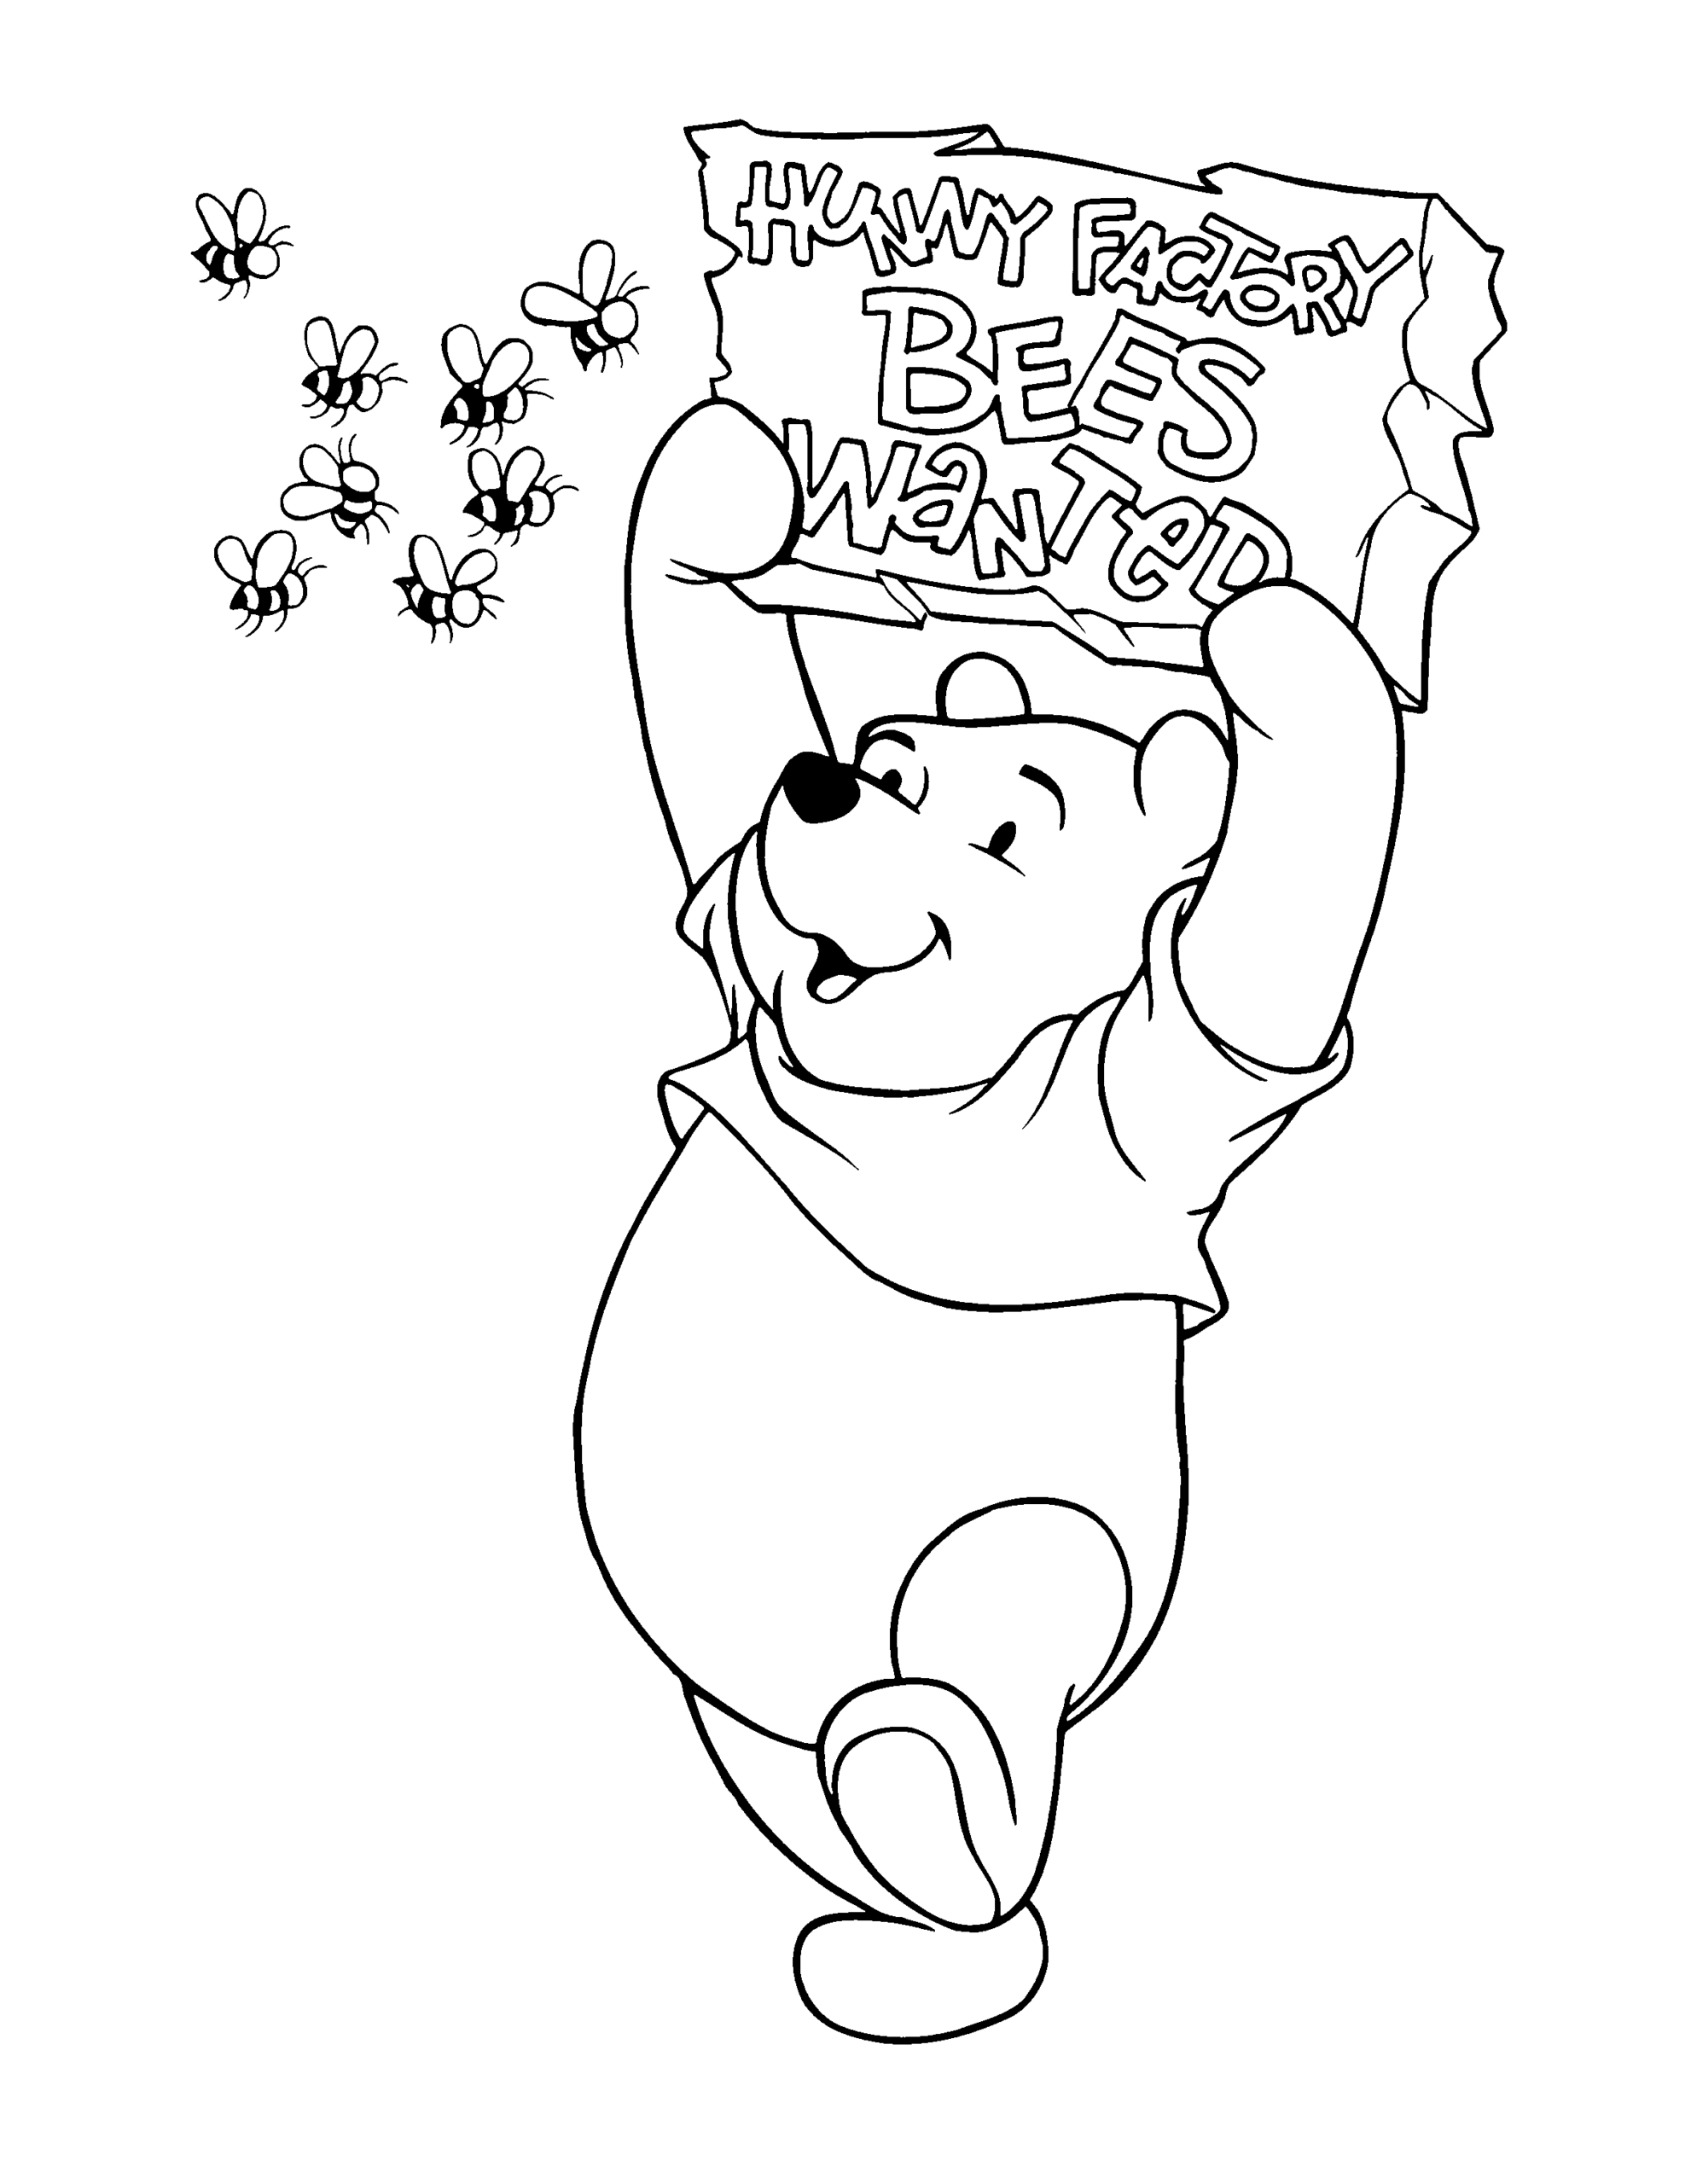 Winnie the Pooh Coloring Pages Cartoons winnie the pooh 82 Printable 2020 7203 Coloring4free